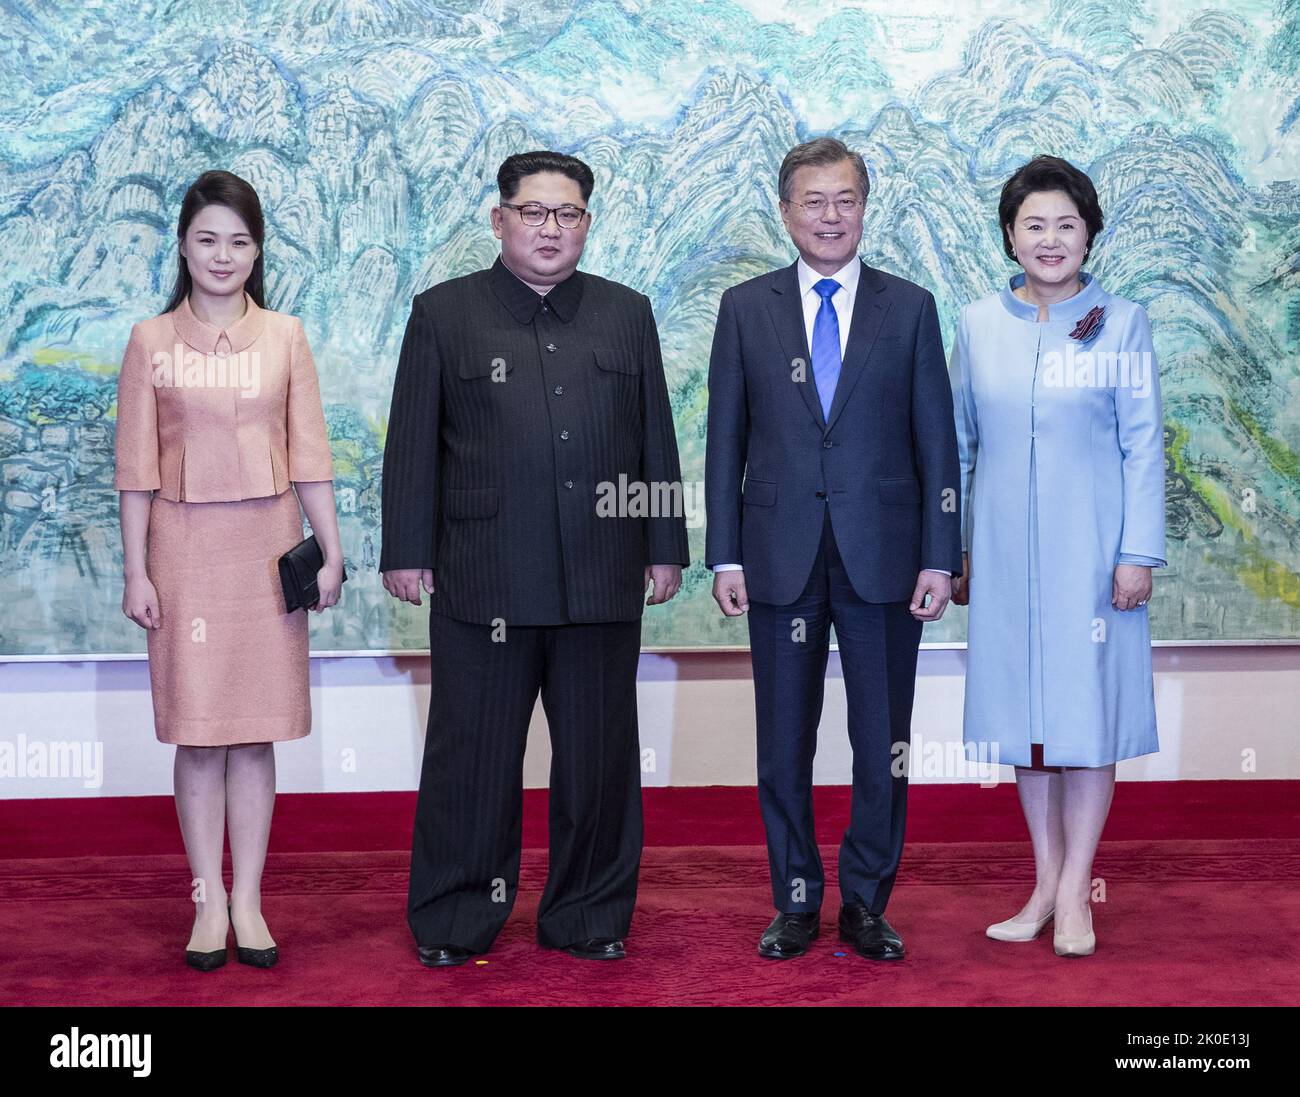 2018 inter-Korean summit. Left to right: Ri Sol-ju with her husband, Kim Jong-un (leader of North Korea), Moon Jae-in (President of South Korea), and his wife Kim Jong-sook (April 27 2018). Credit: World History Archive courtesy of the Blue House (Republic of Korea). Stock Photo